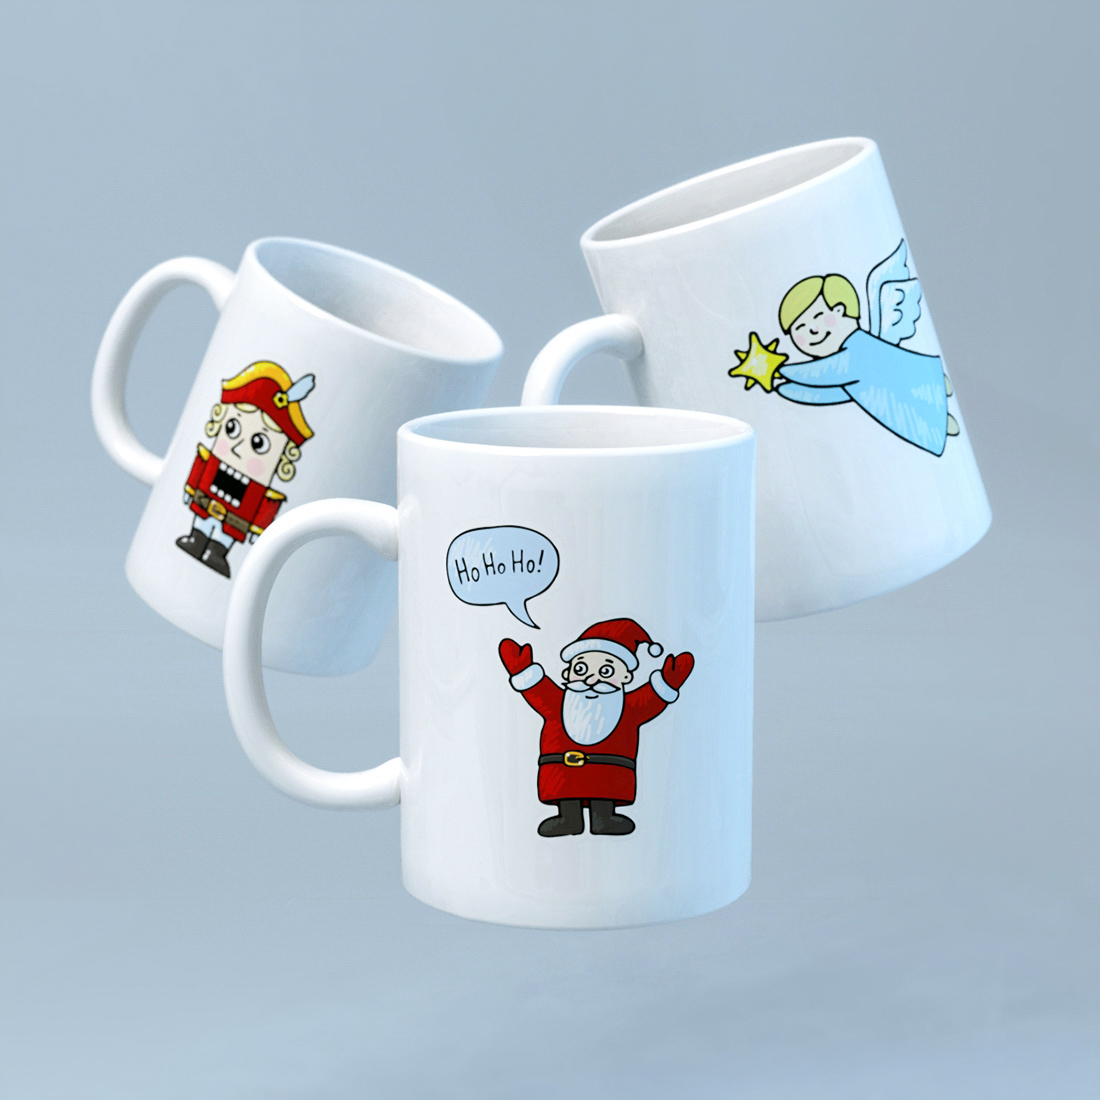 Christmas elements cup mockup.